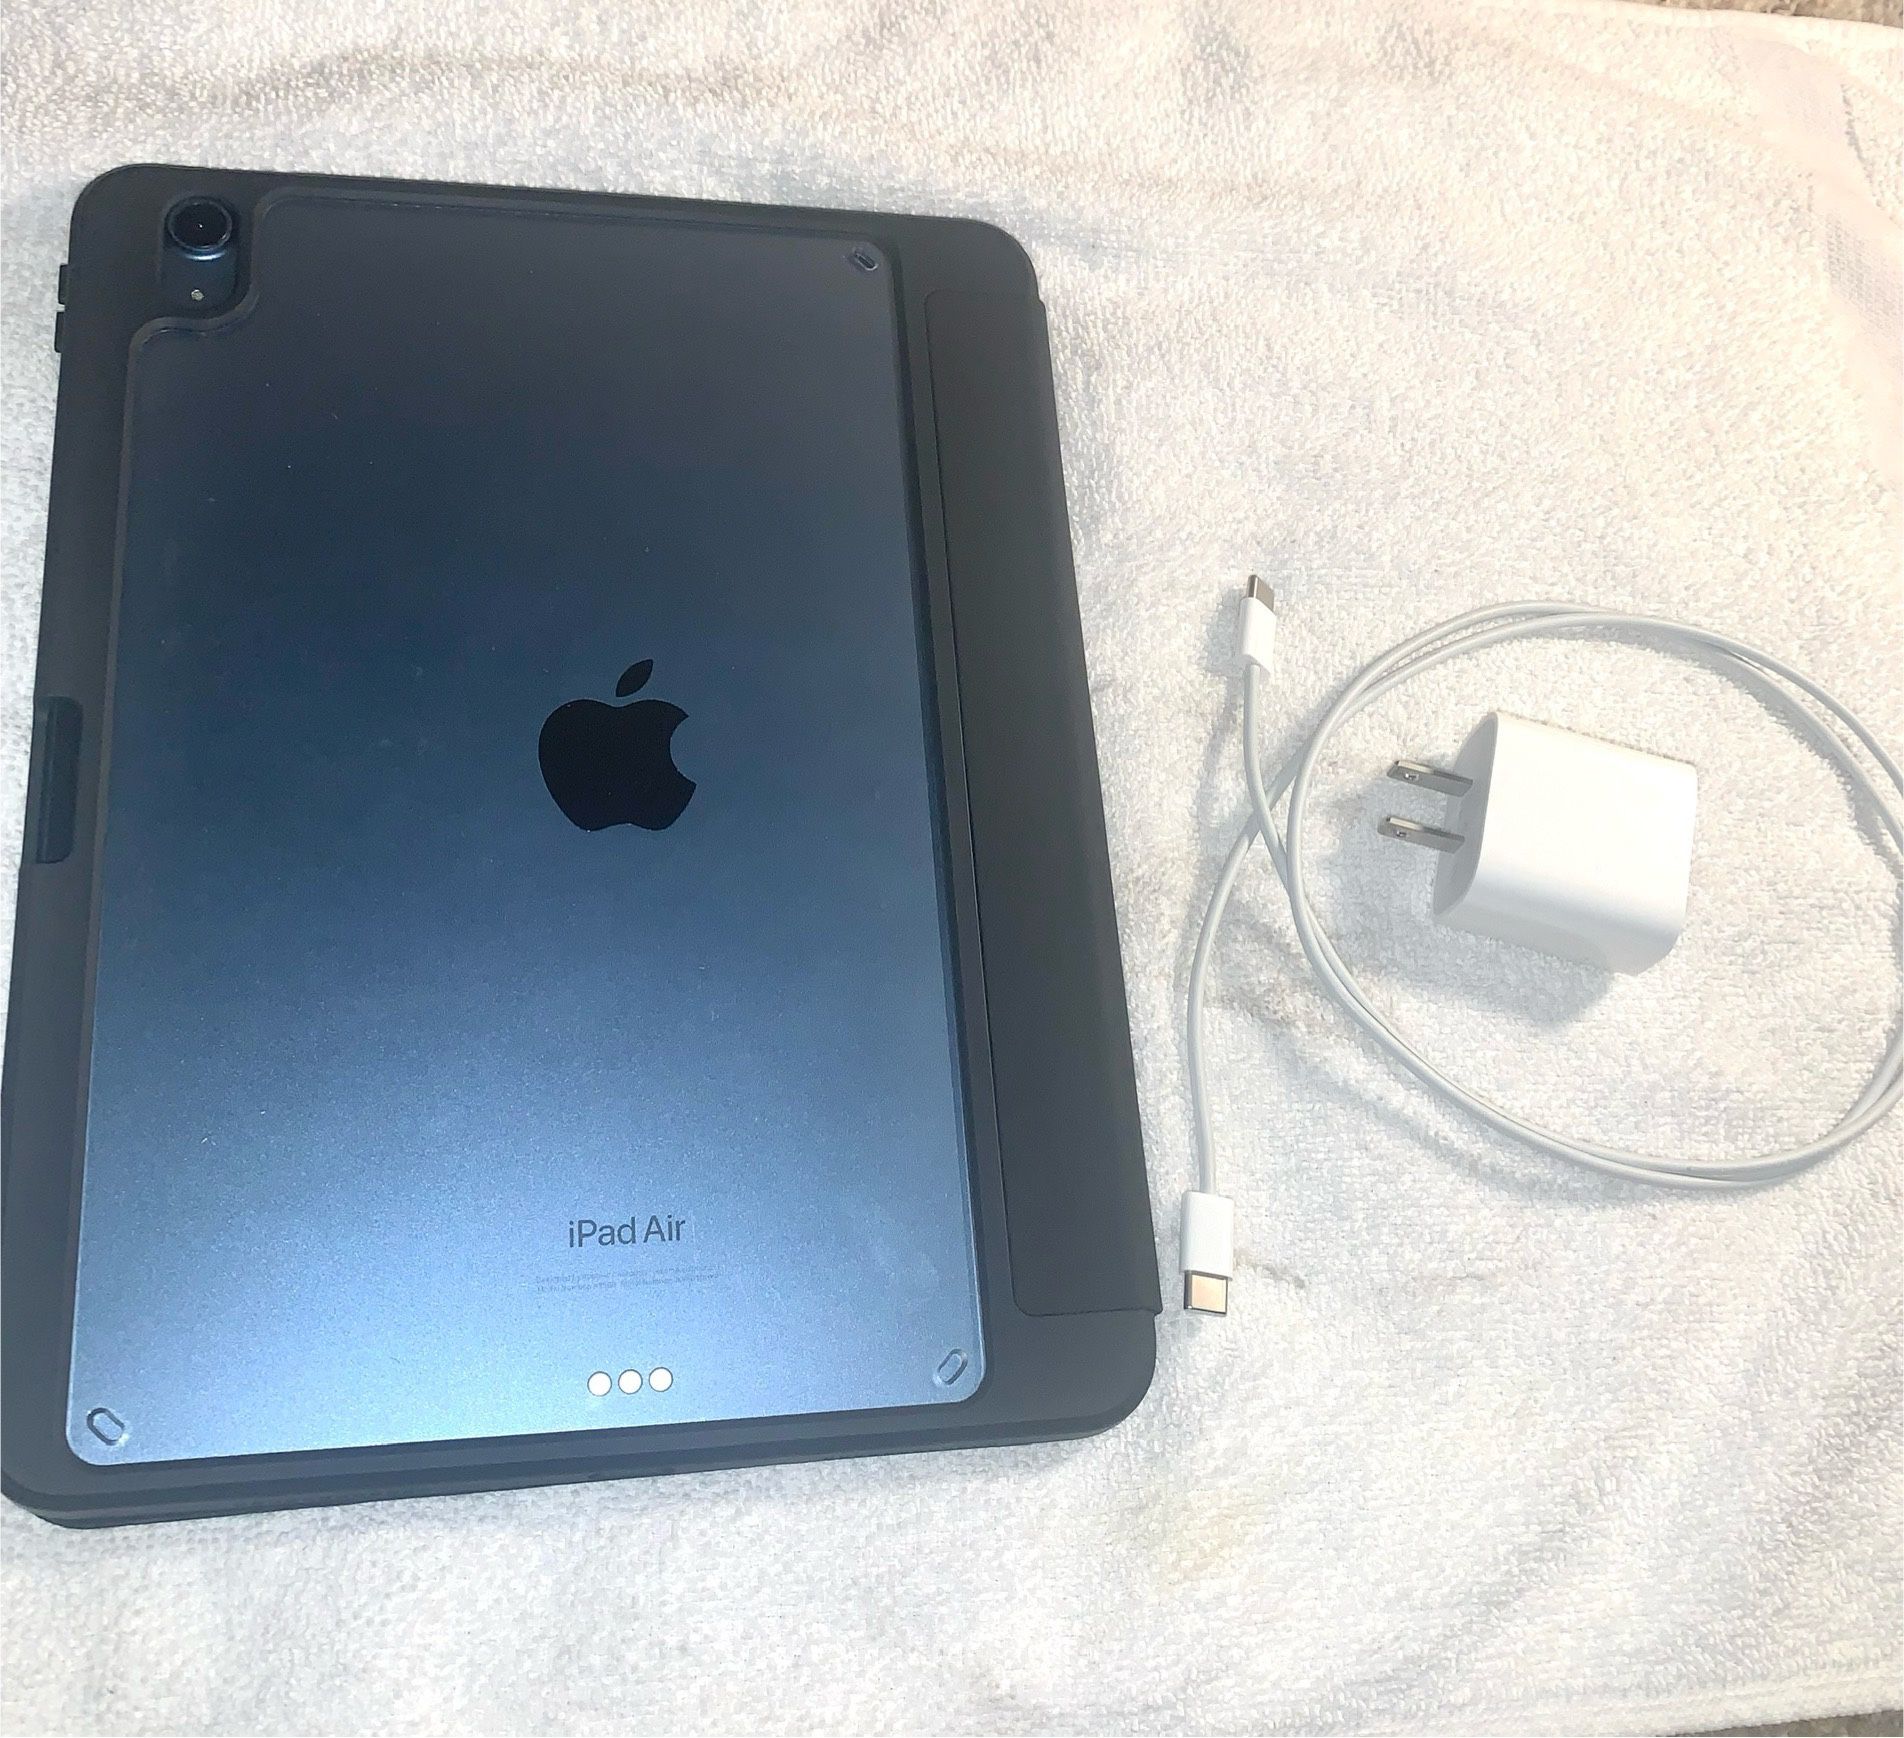 Apple IPad Air with Protective Case & Charger